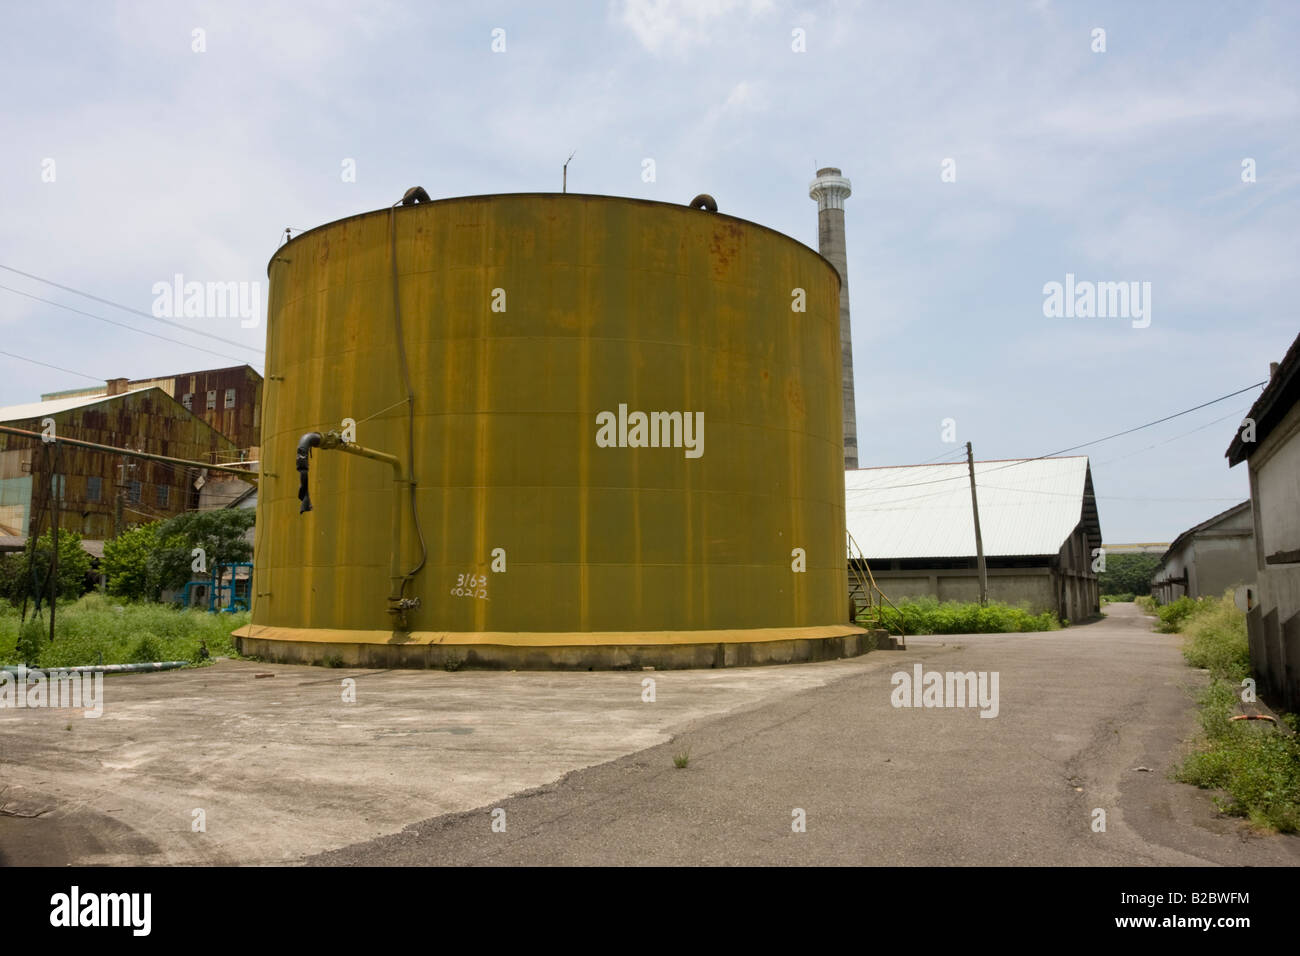 Old warehouses and chimney with public art Ciaotou Sugar Factory Ciaotou Kaohsiung Taiwan ROC Stock Photo